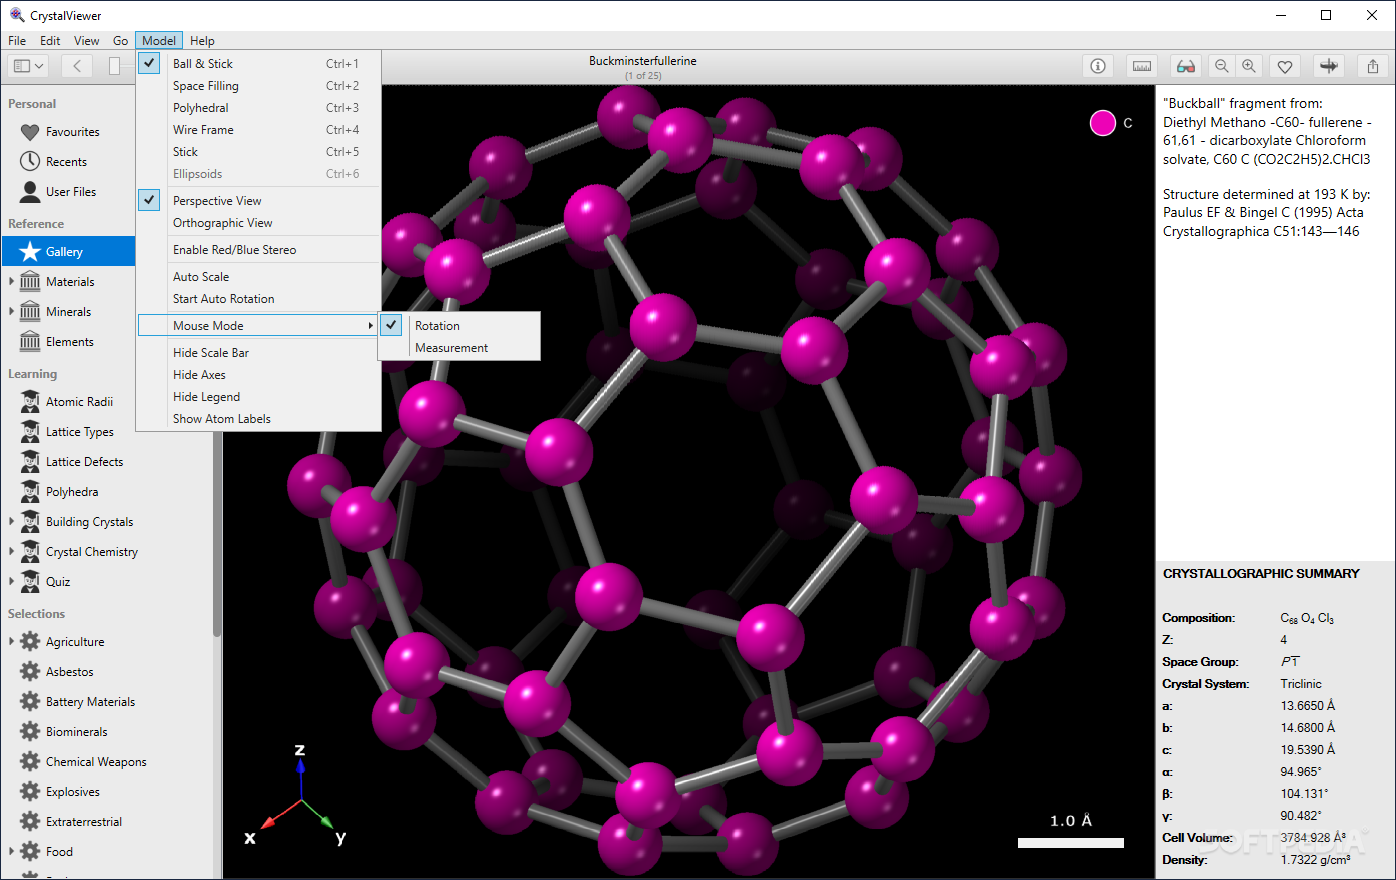 download the new CrystalMaker 10.8.2.300